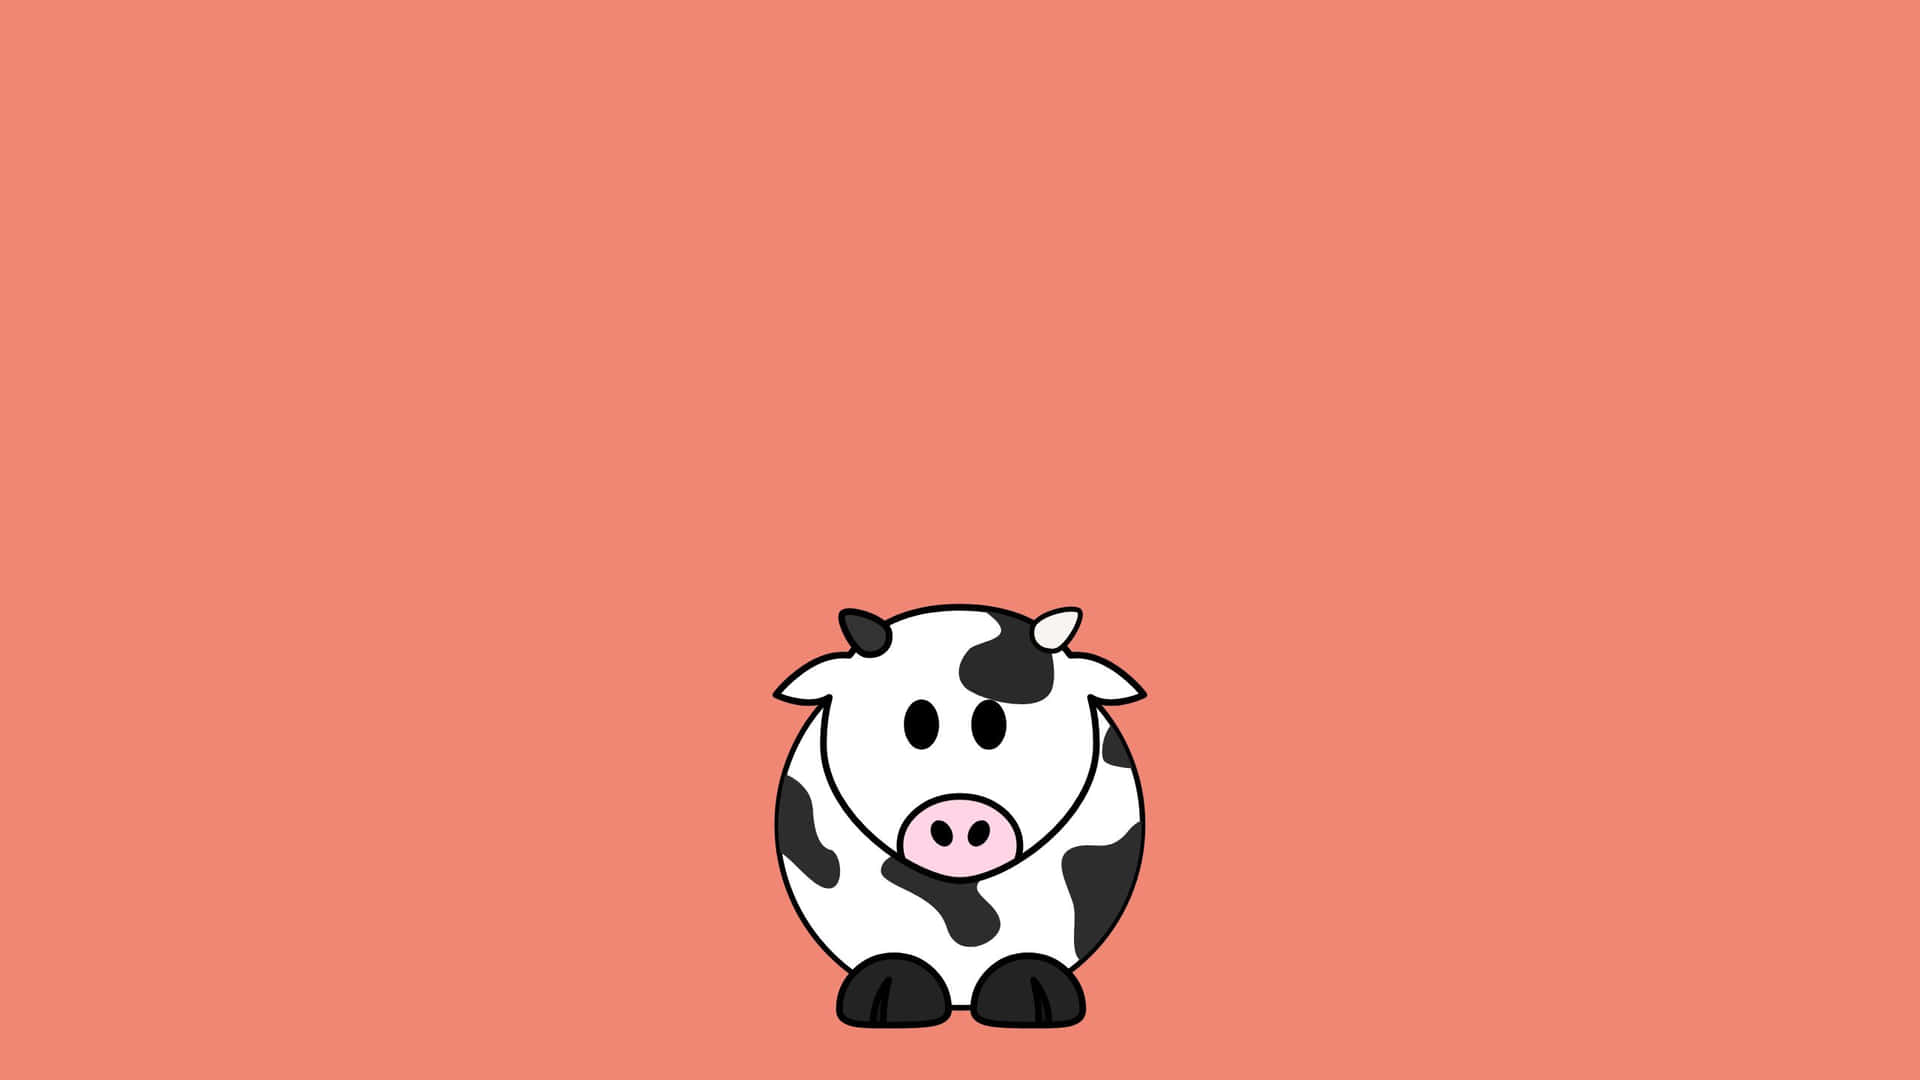 A Cartoon Cow Standing On A Pink Background Wallpaper